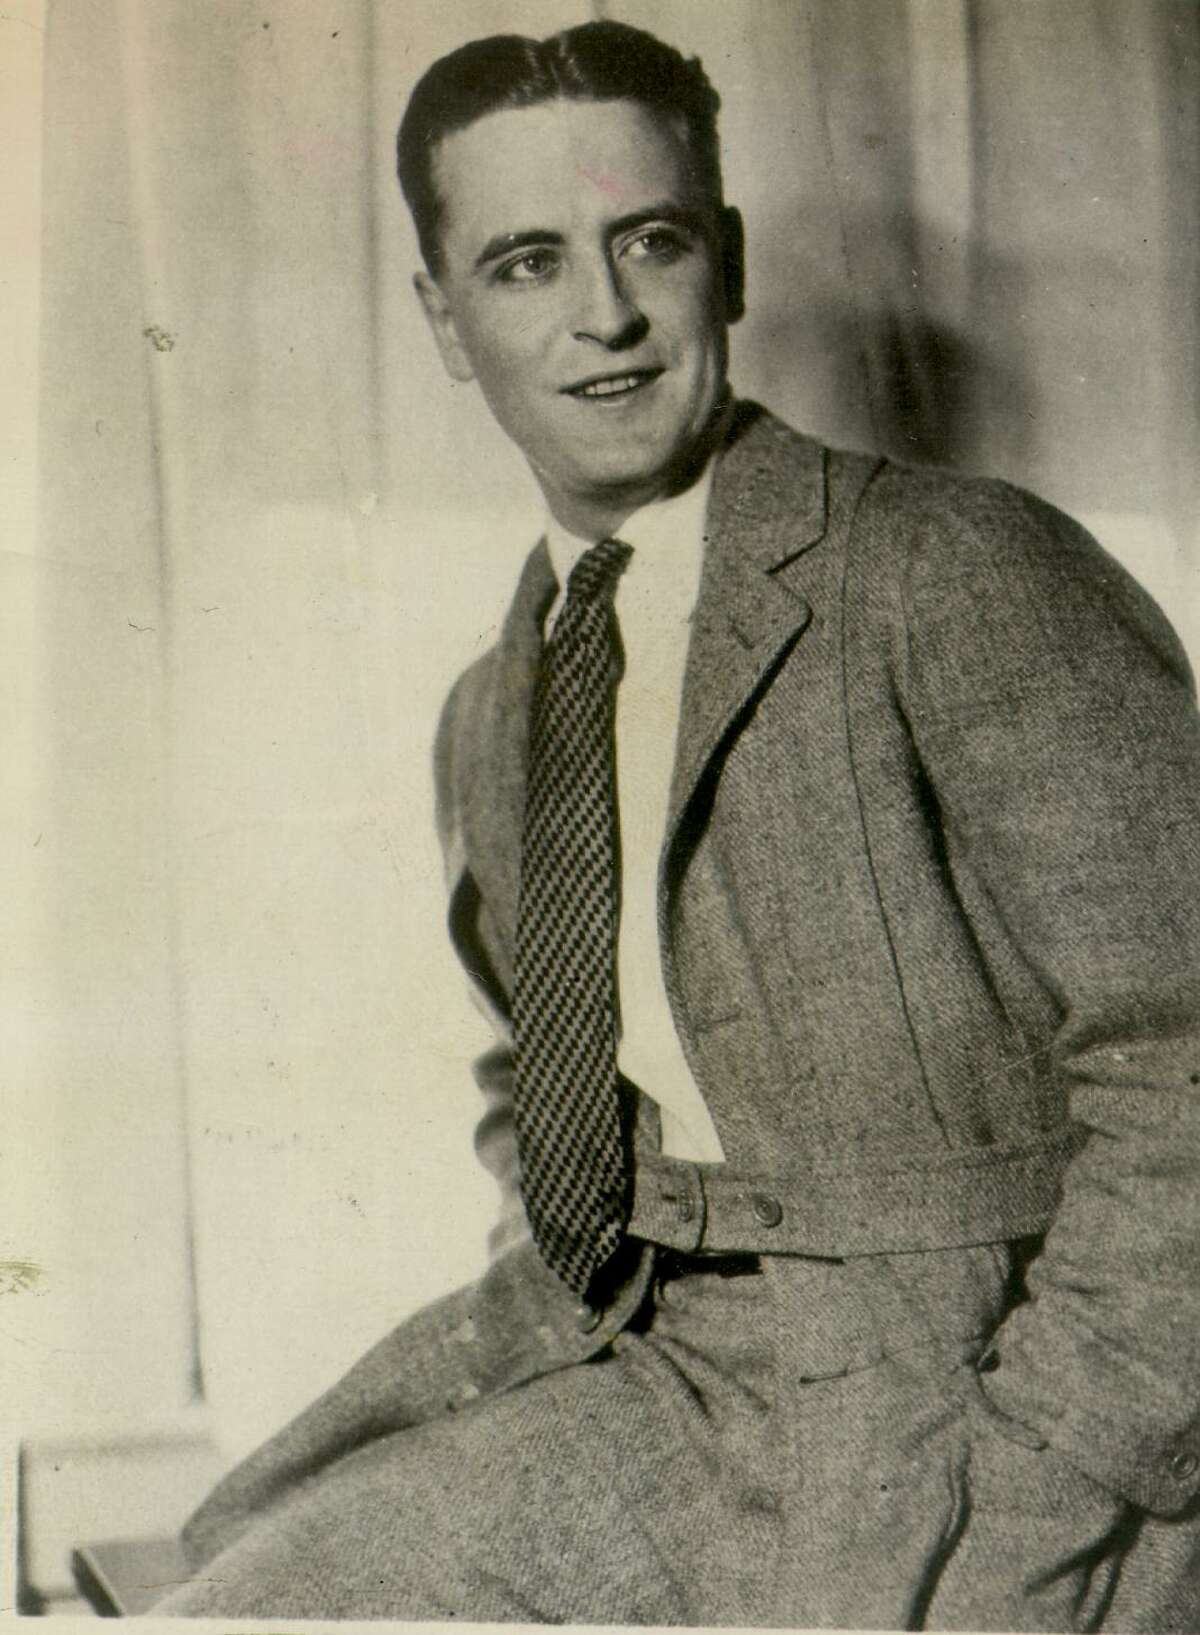 Writer F. Scott Fitzgerald is shown in this undated file photo. Fitzgerald was born in St. Paul, Minnesota, on Sept. 24, 1896.